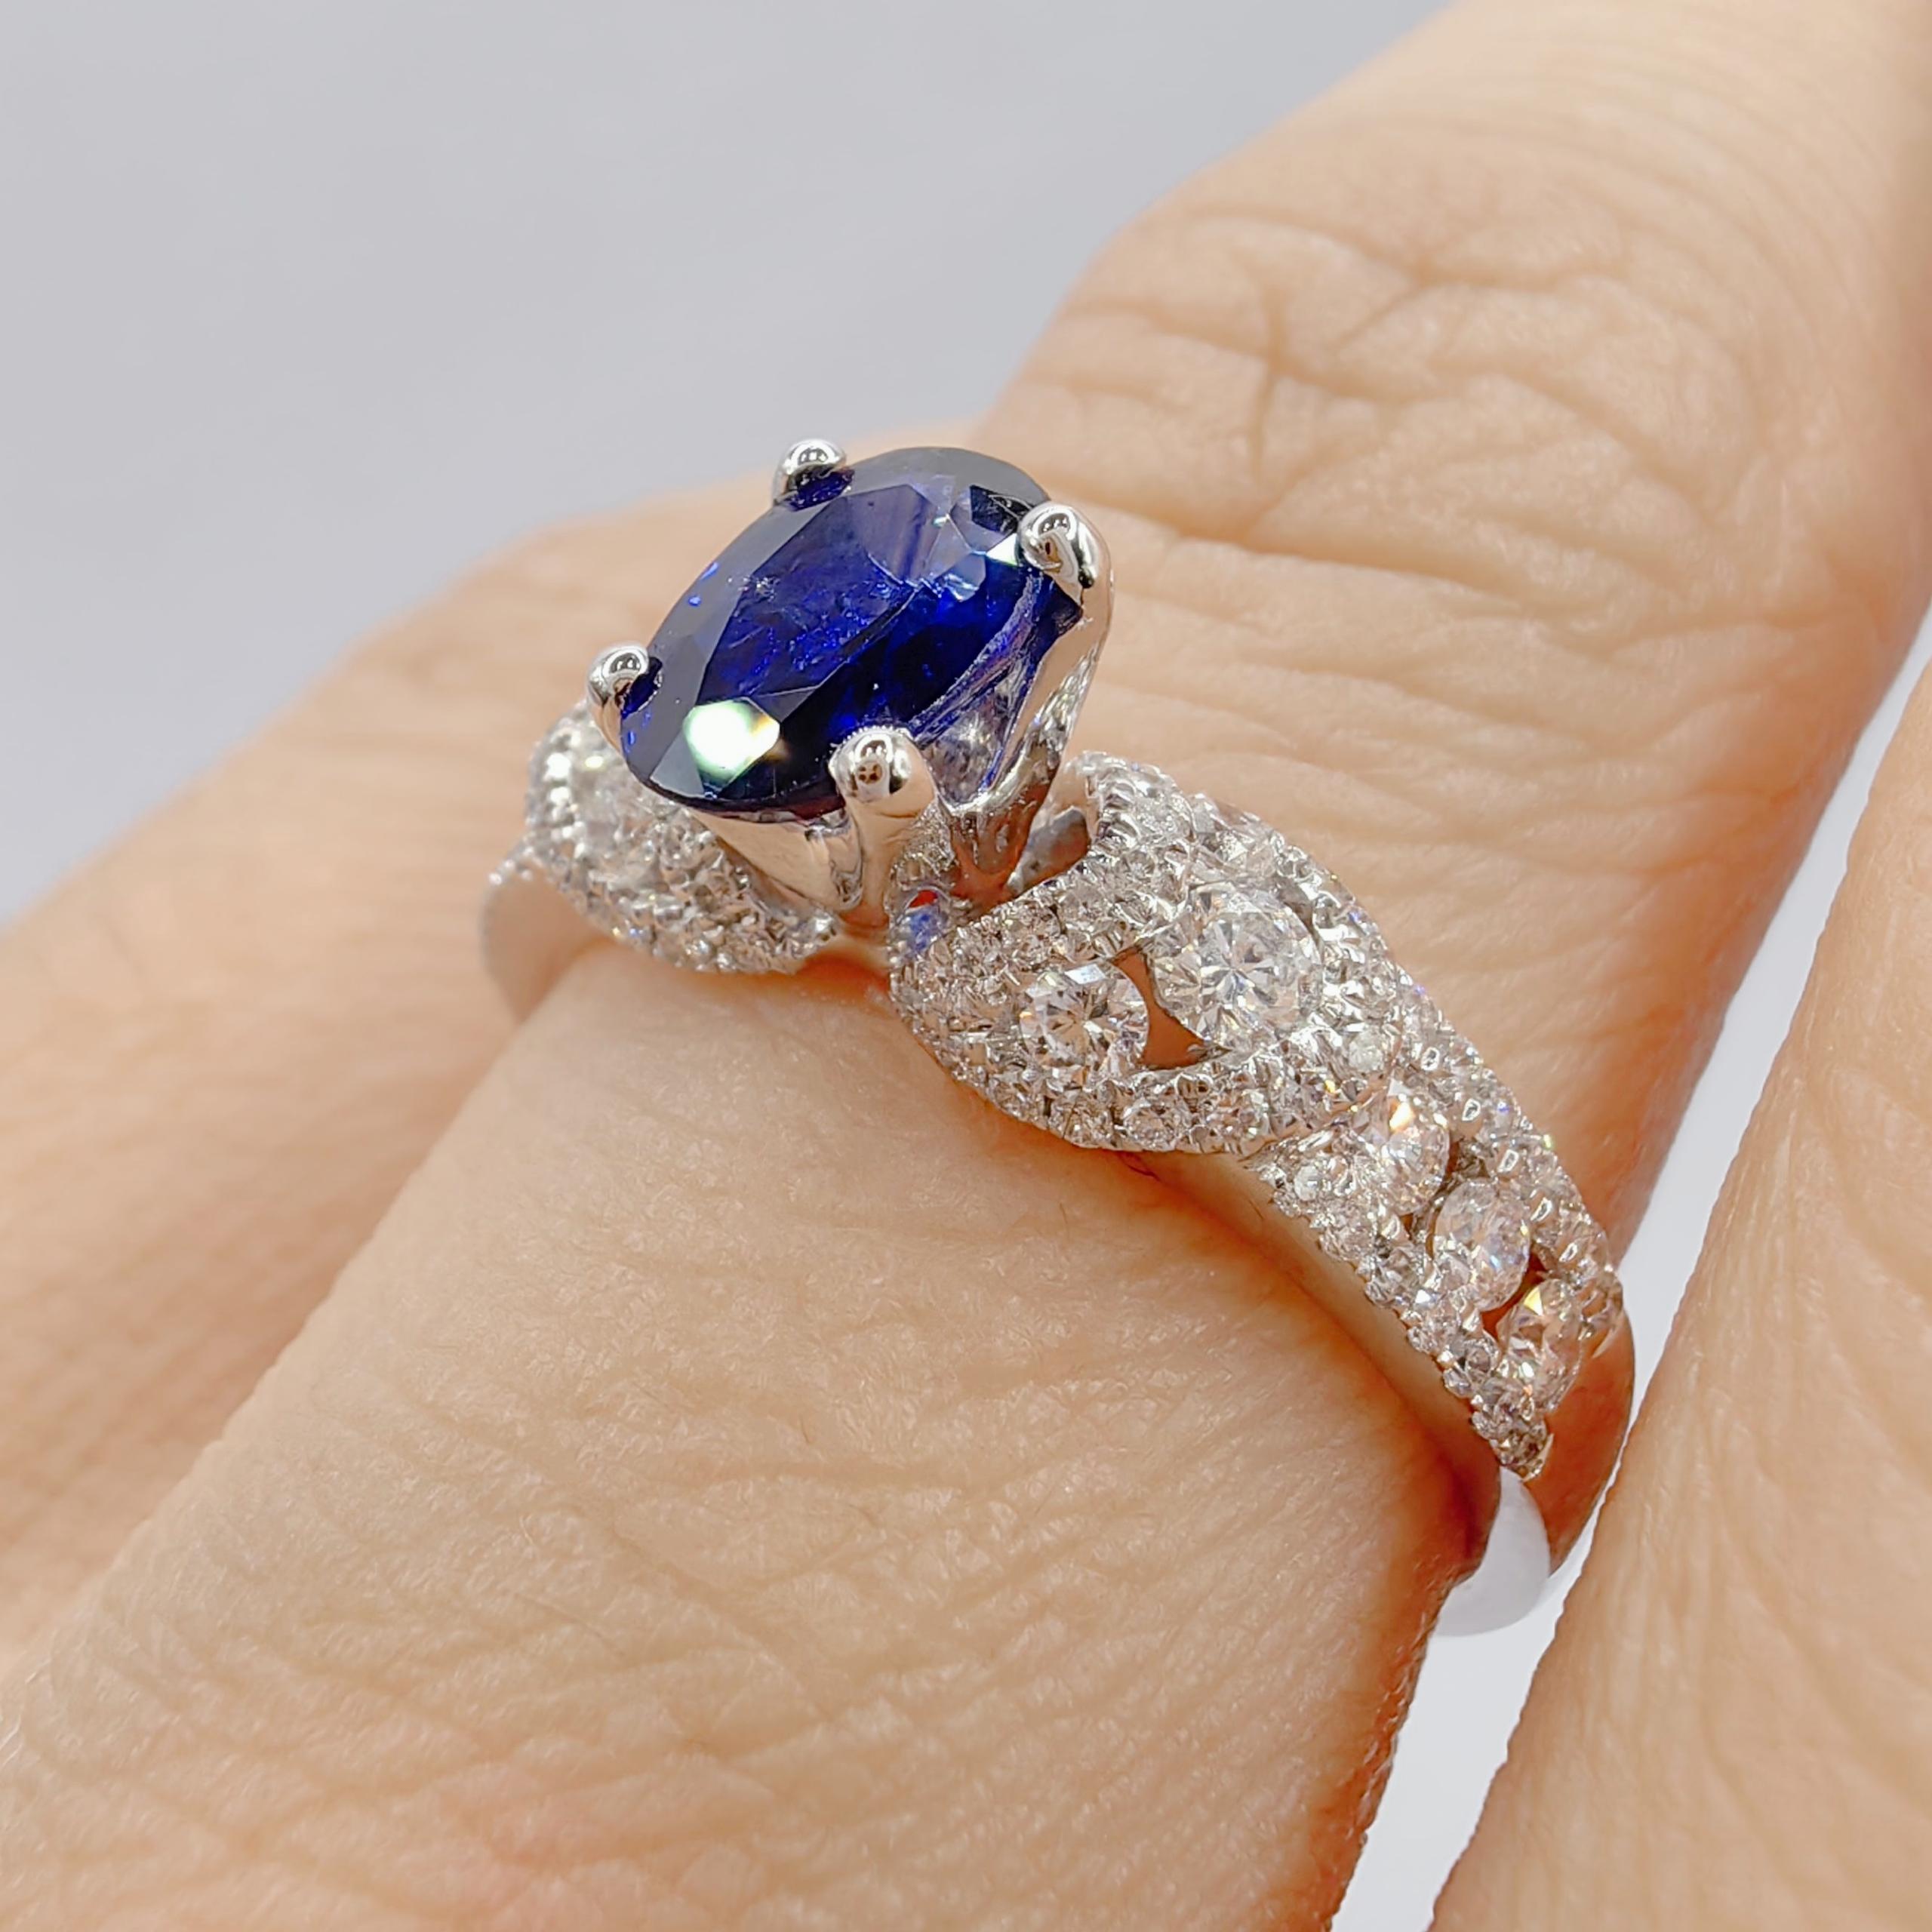 .88 Carat Oval-Cut Sapphire 88 Diamond Cluster Ring in 18k White Gold For Sale 2